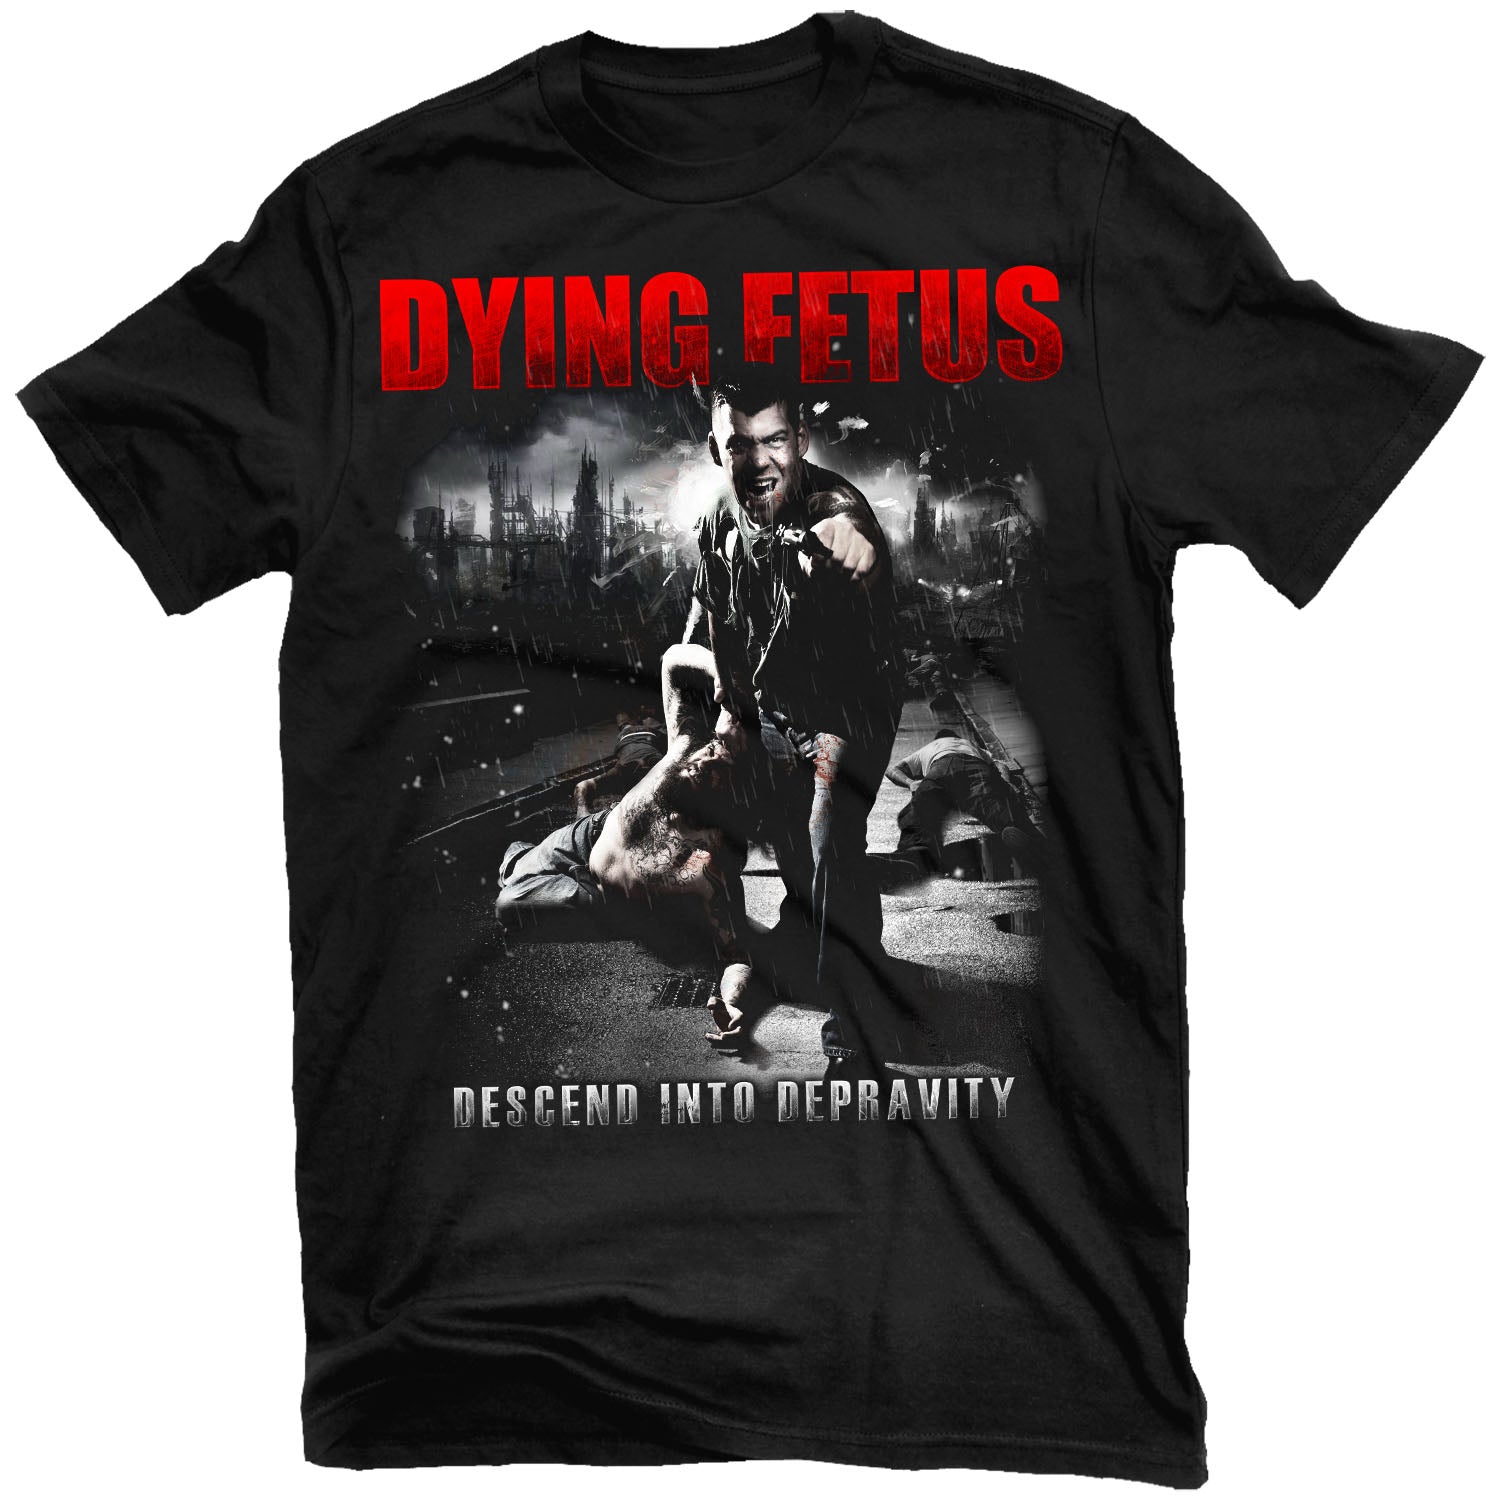 Dying Fetus "Descend Into Depravity" T-Shirt